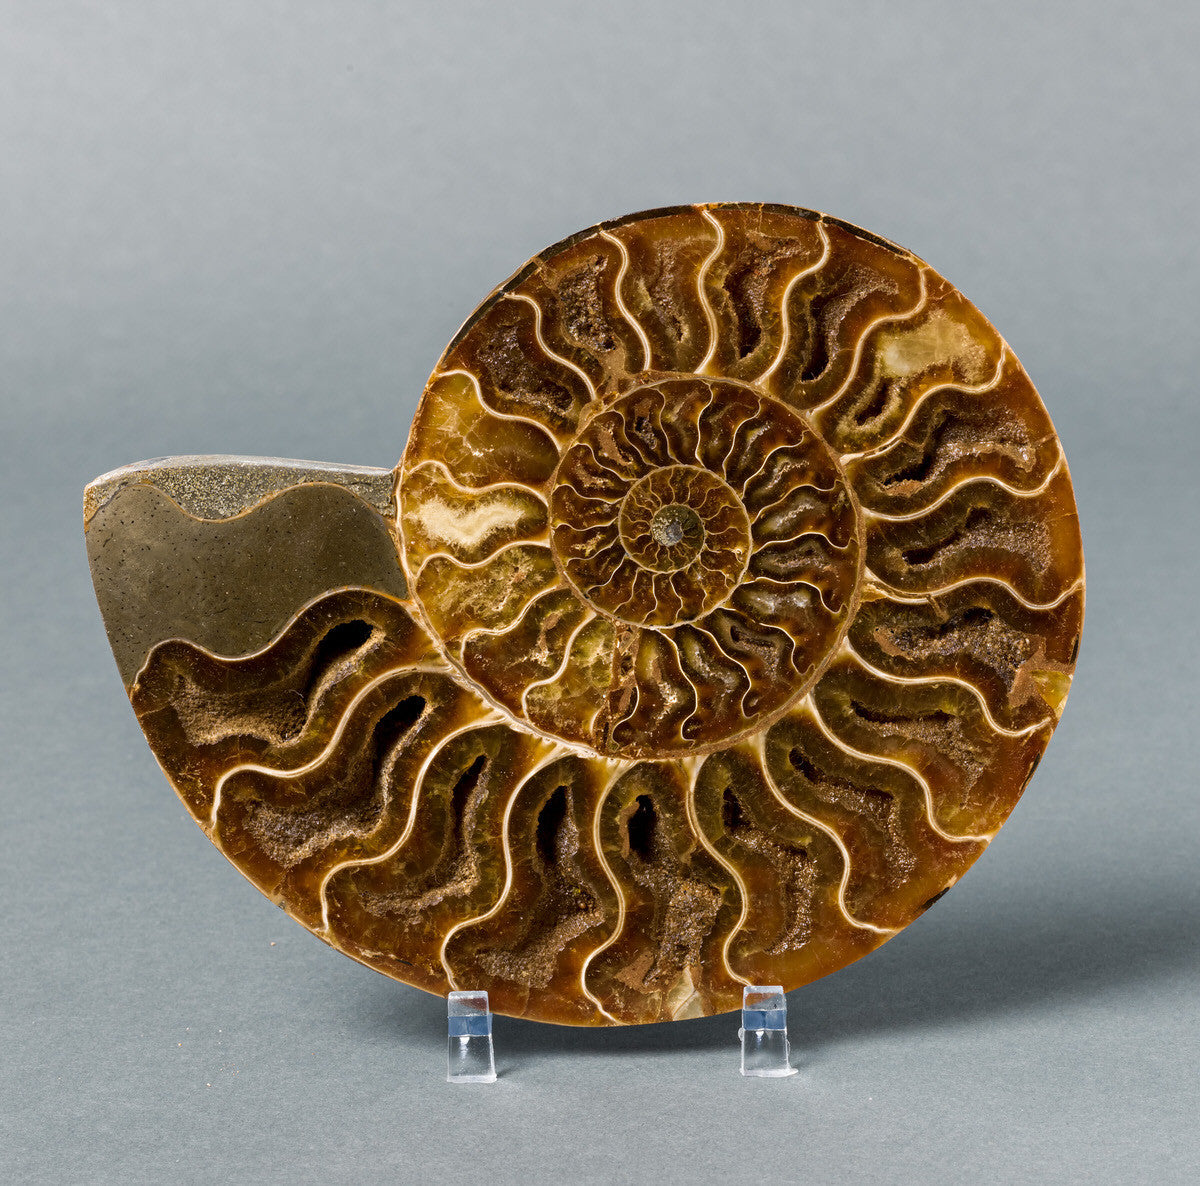 Ammonite Fossil for Sale - Madagascar – Fossil Realm